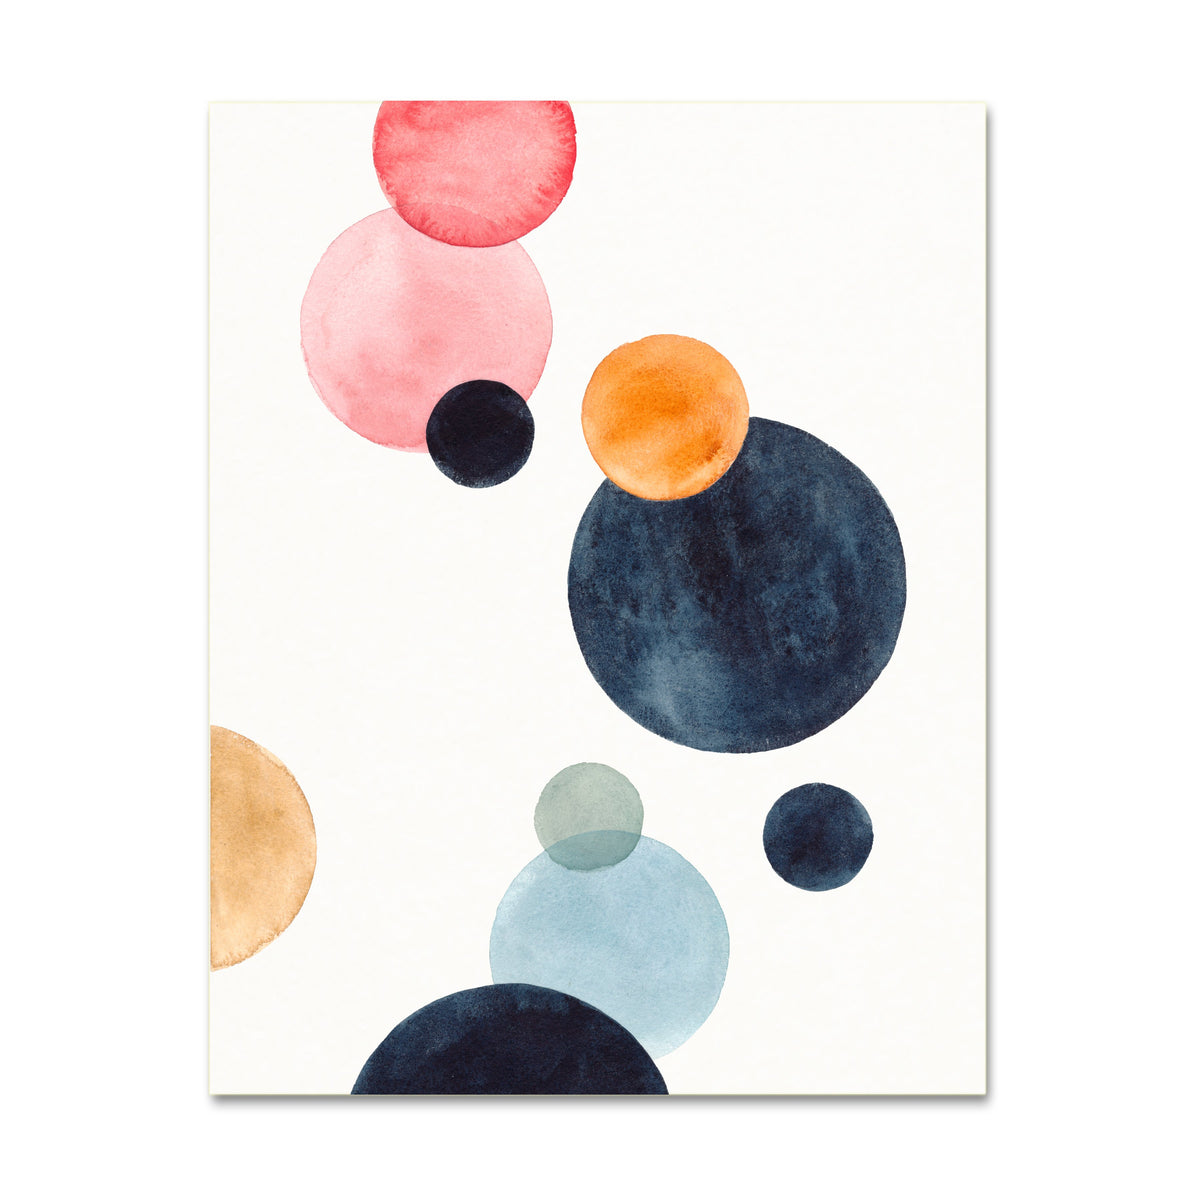 Abstract Wall Art. Colorful Watercolor Contemporary Decor.